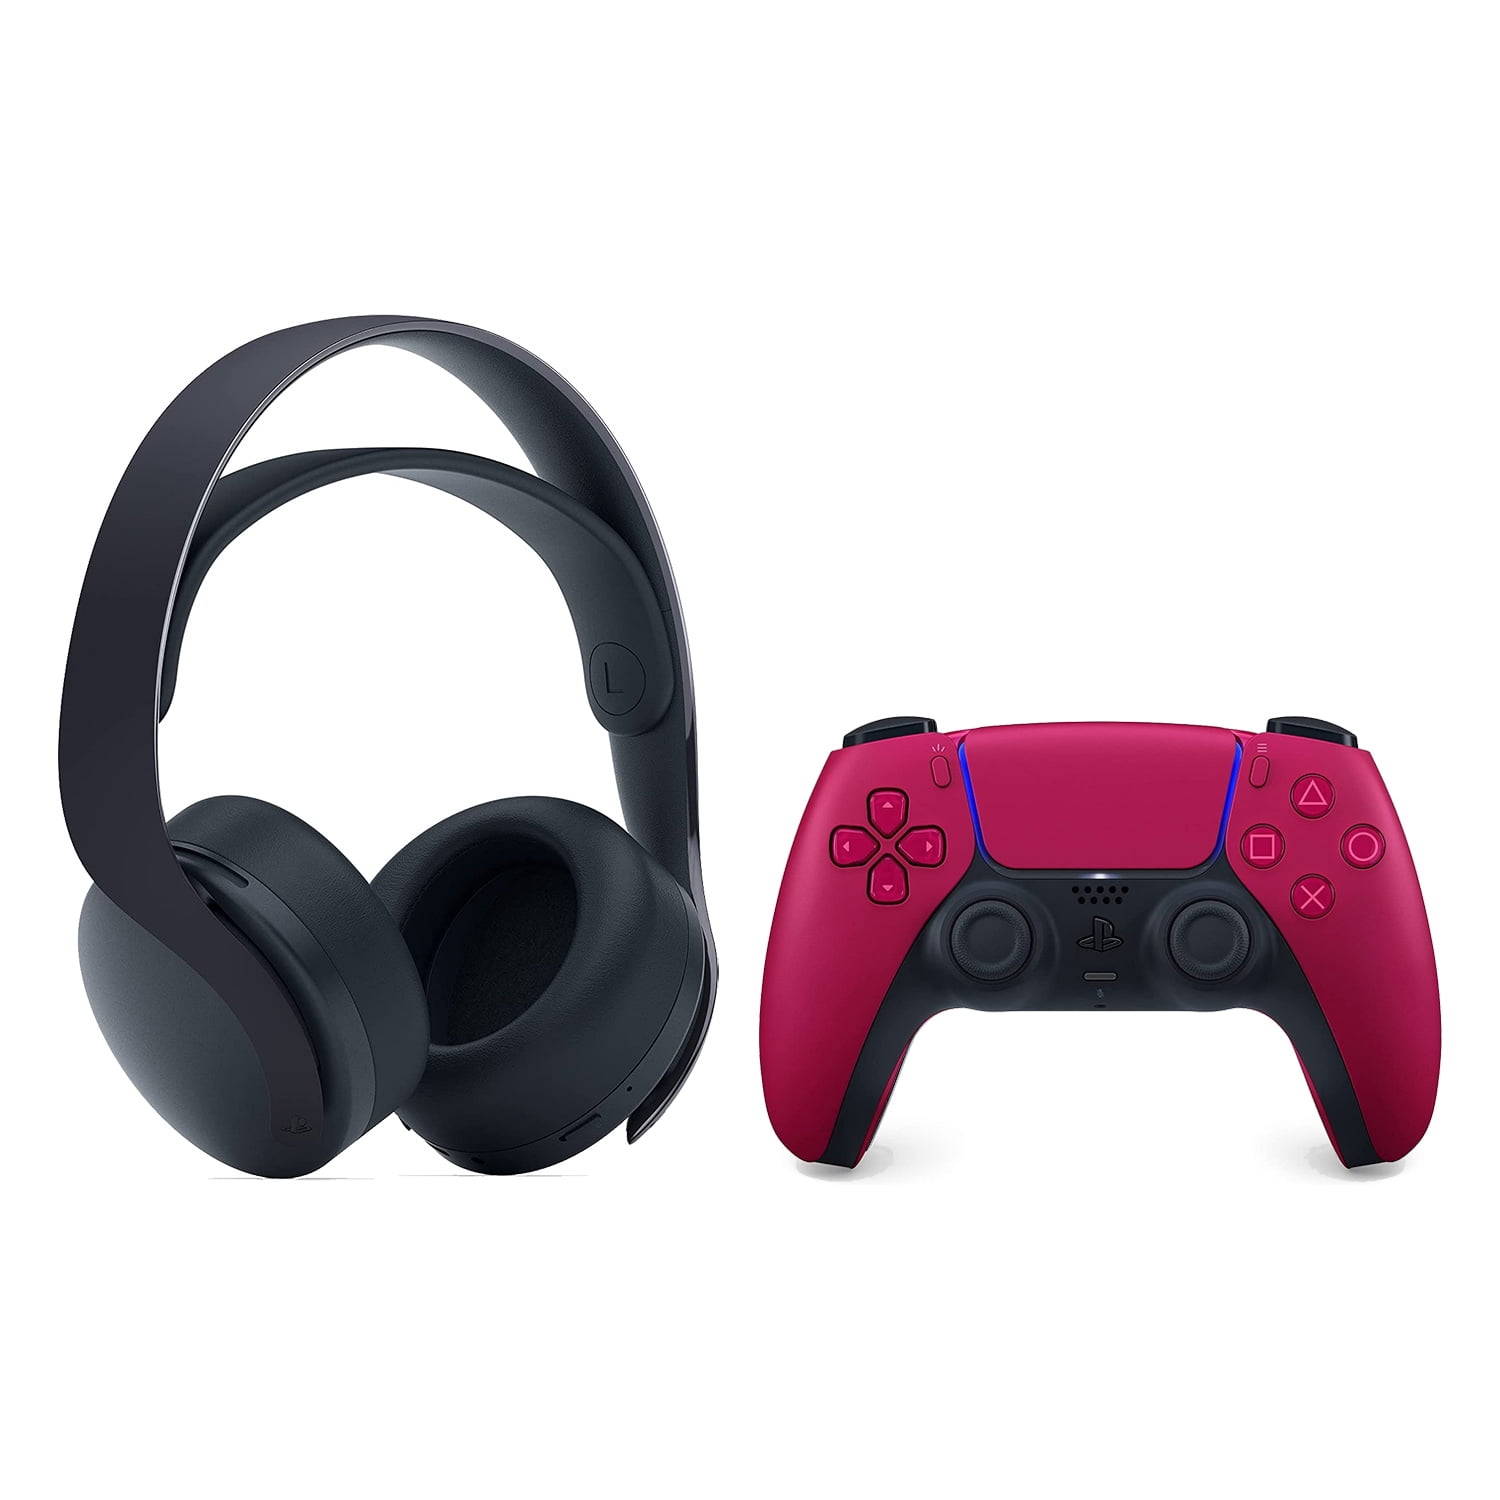 Sony PULSE 3D Wireless Gaming Headset for PS5, PS4, and PC